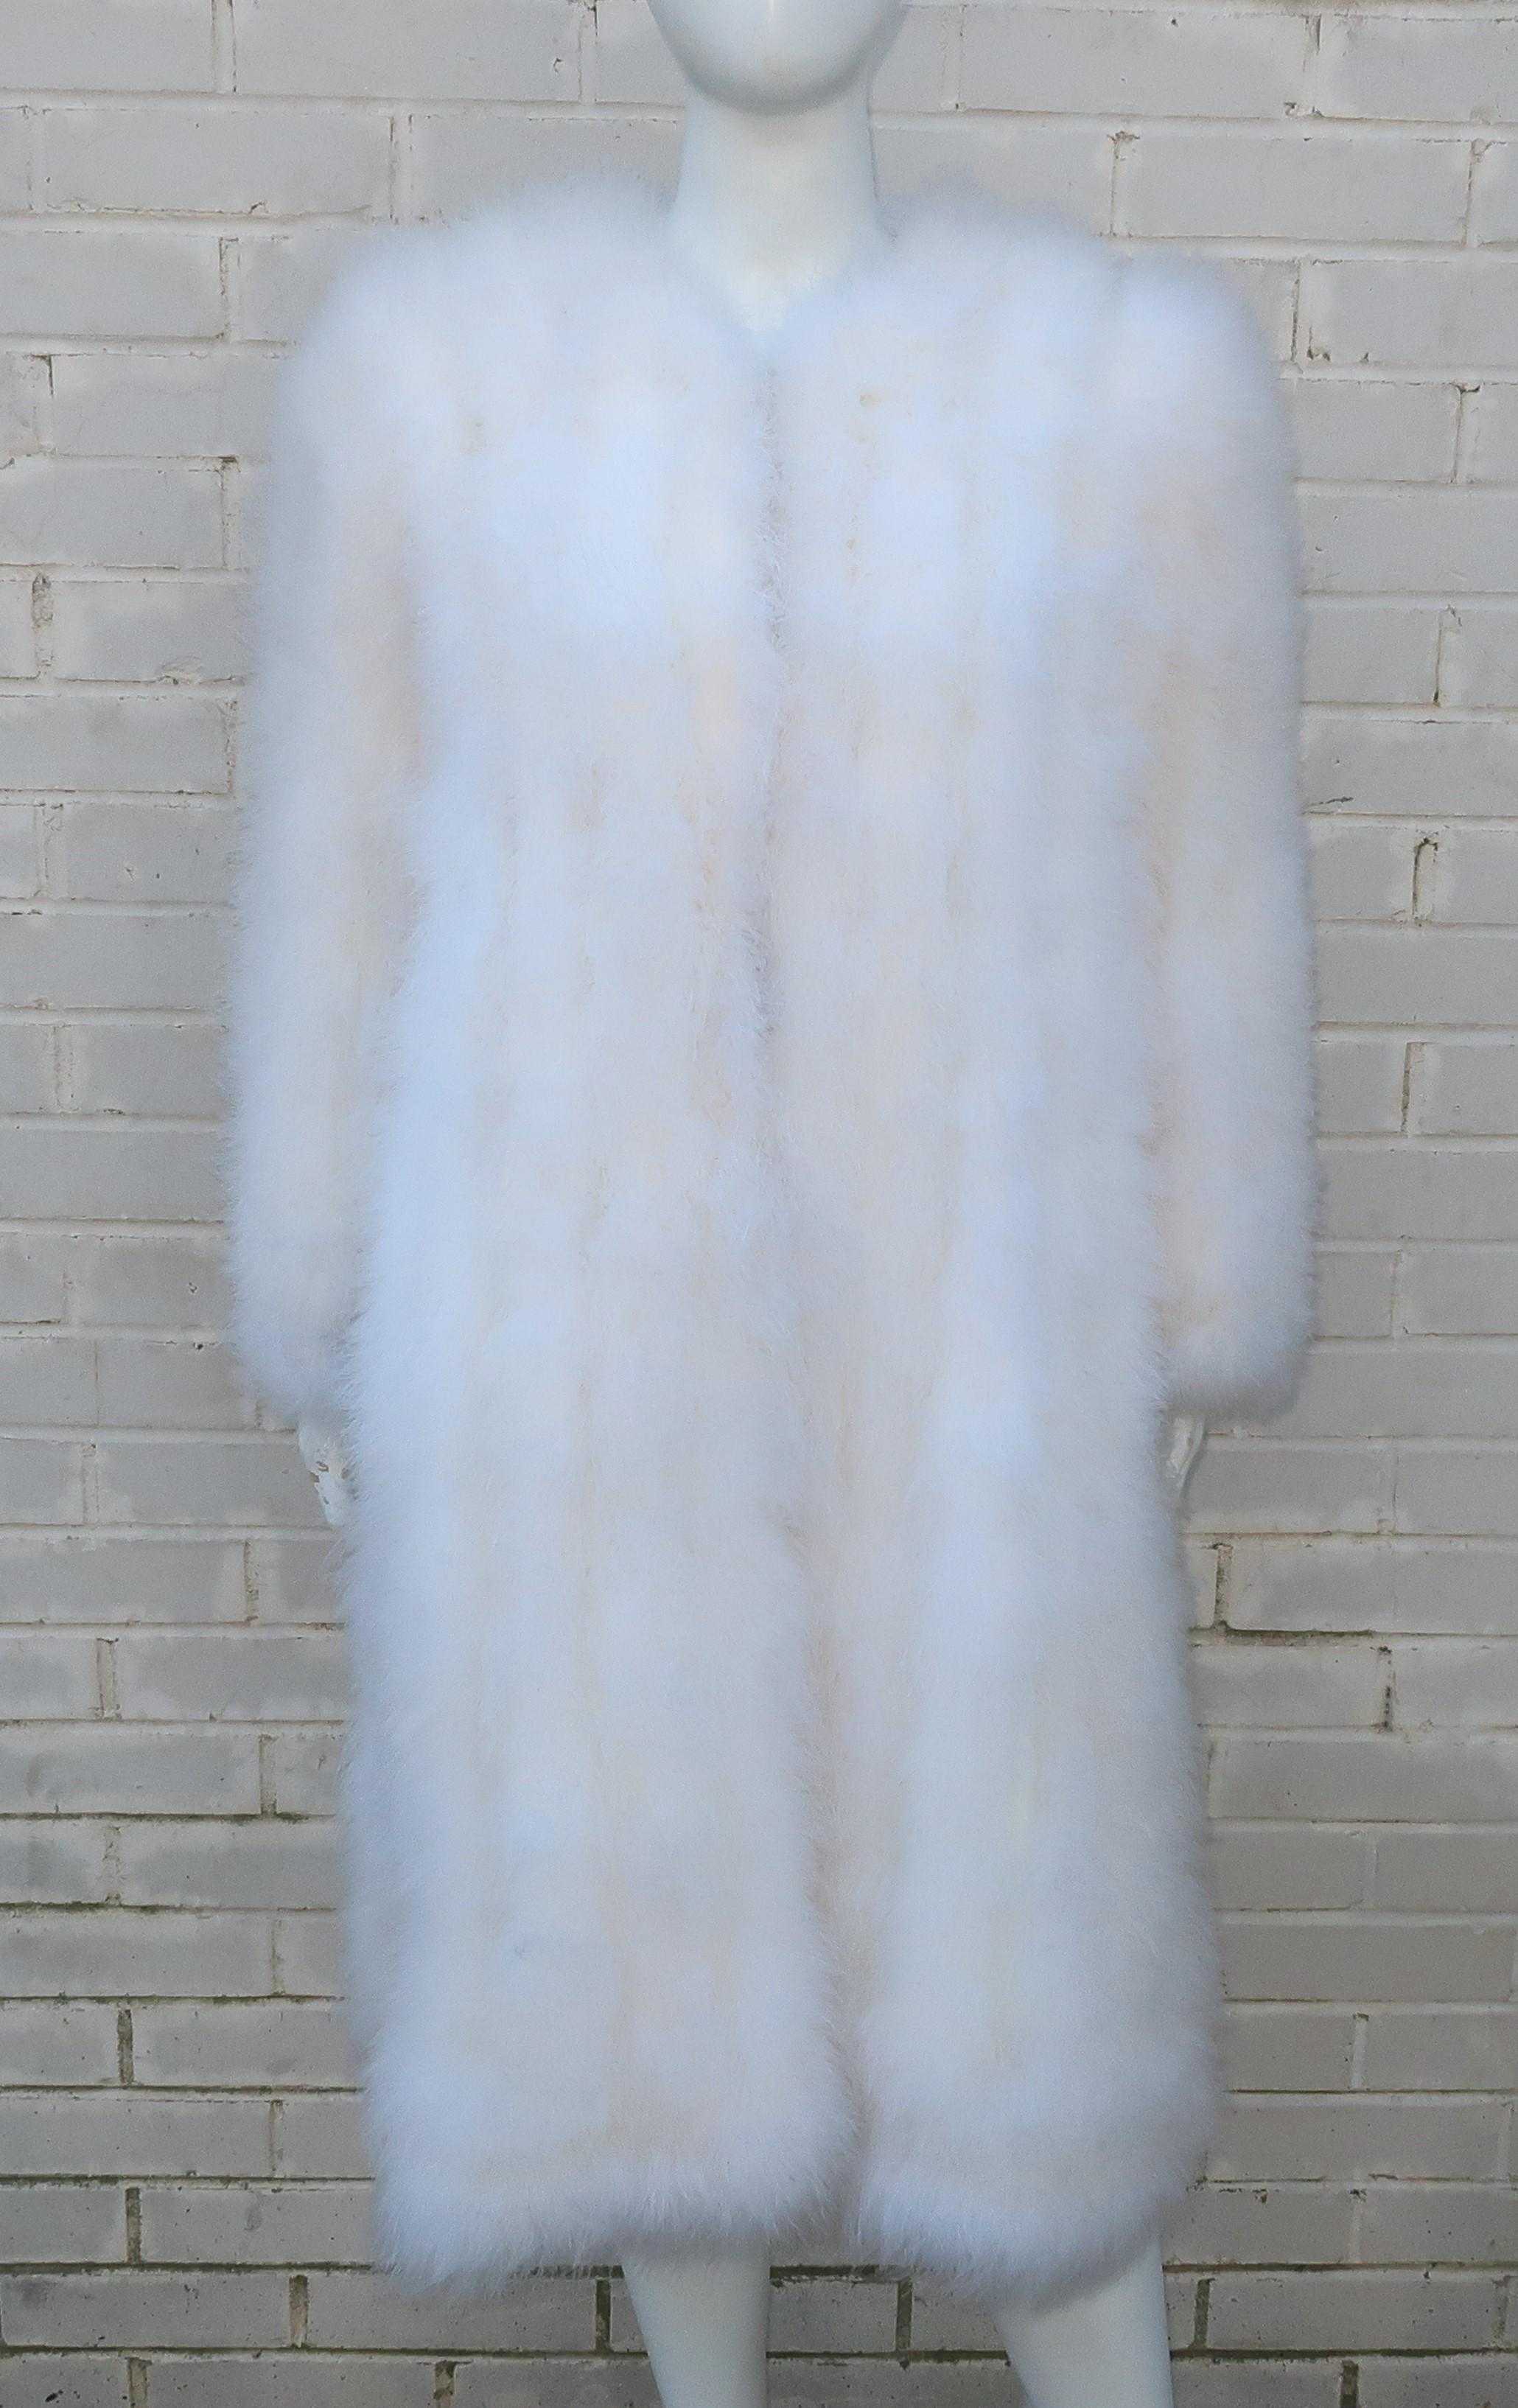 Glam alert!  A C.1980 white Marabou feather coat is just the thing to turn heads.  The collarless silhouette sports hidden hooks at the front, satin lining and side vents.  Shoulder pads create a great line and give the look an early Hollywood